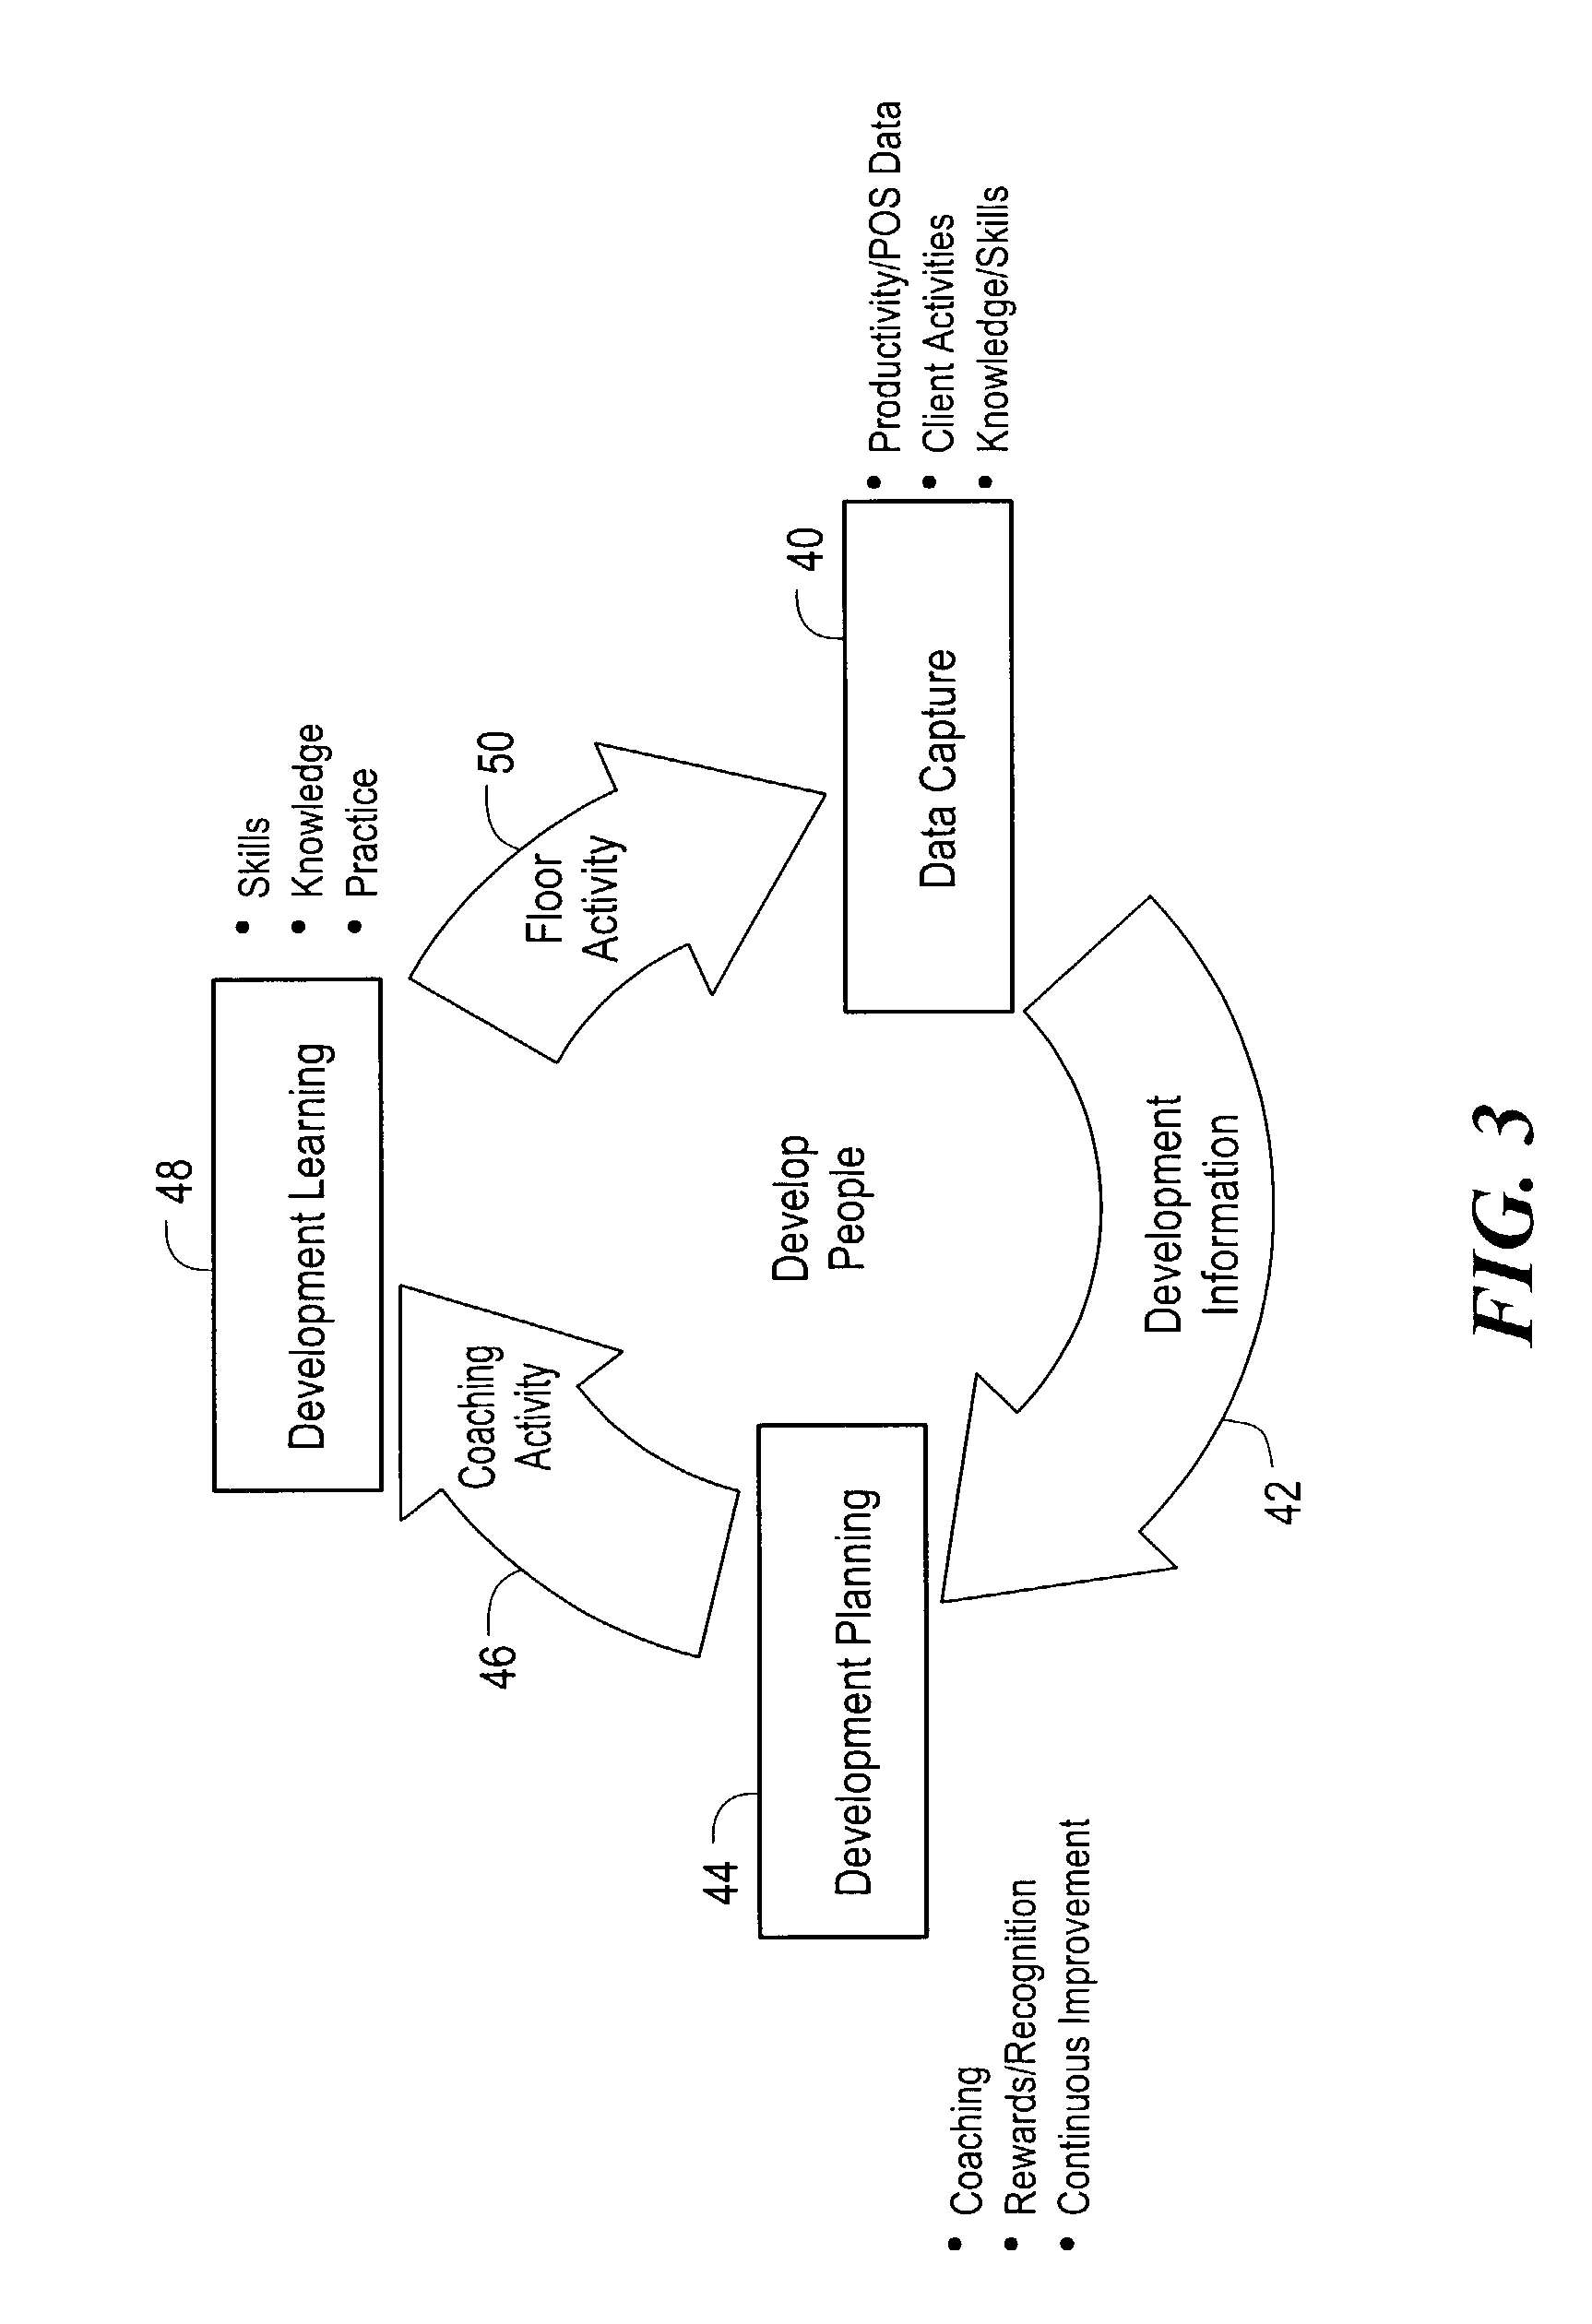 System and method for determining recommended action based on measuring and analyzing store and employee data